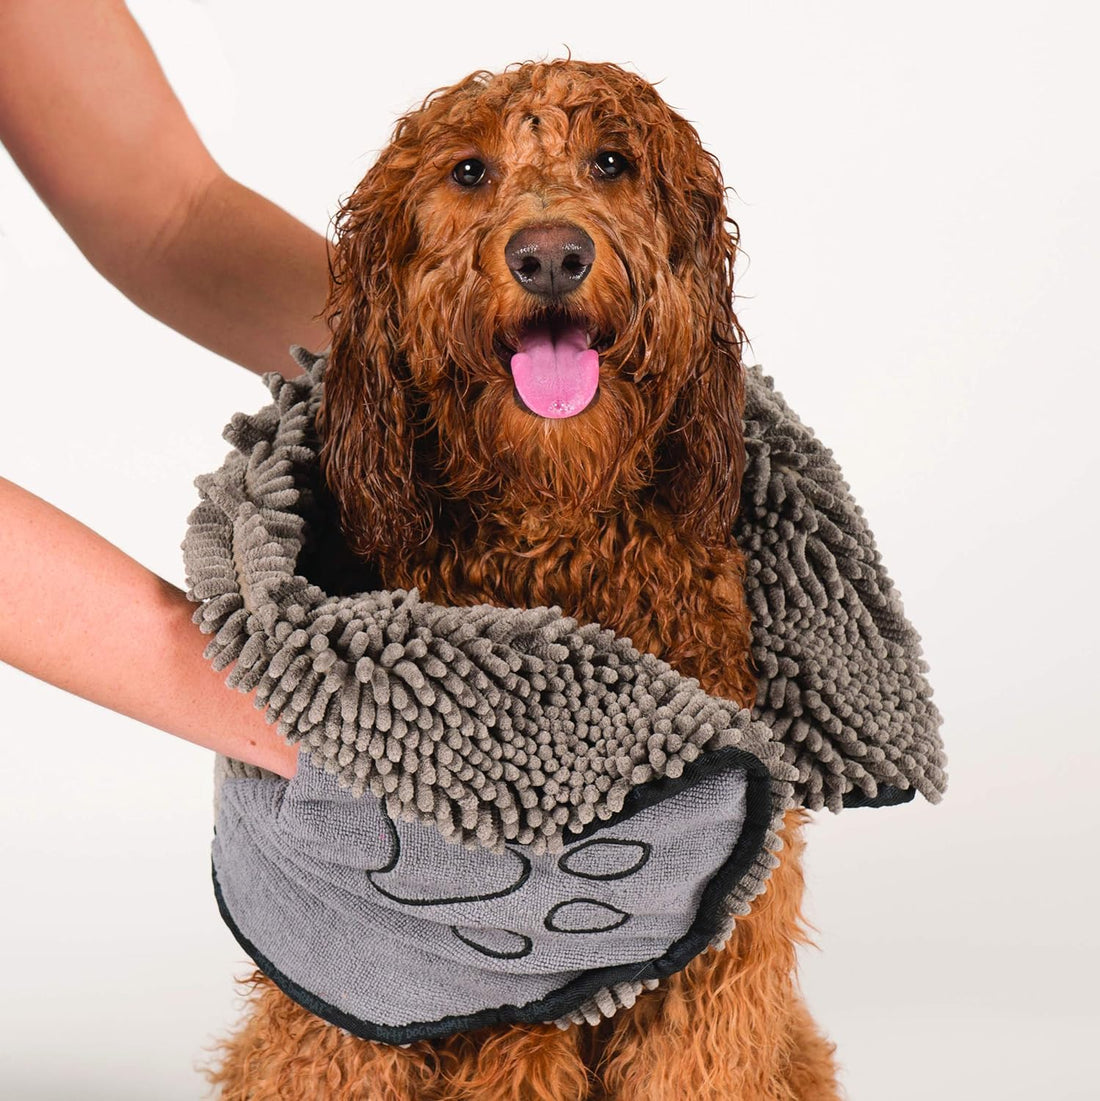 Shammy Dog Towels for Drying Dogs - Heavy Duty Soft Microfiber Bath Towel - Super Absorbent, Quick Drying, &amp; Machine Washable - Must Have Dog &amp; Cat Bathing Supplies | Grey 13X31